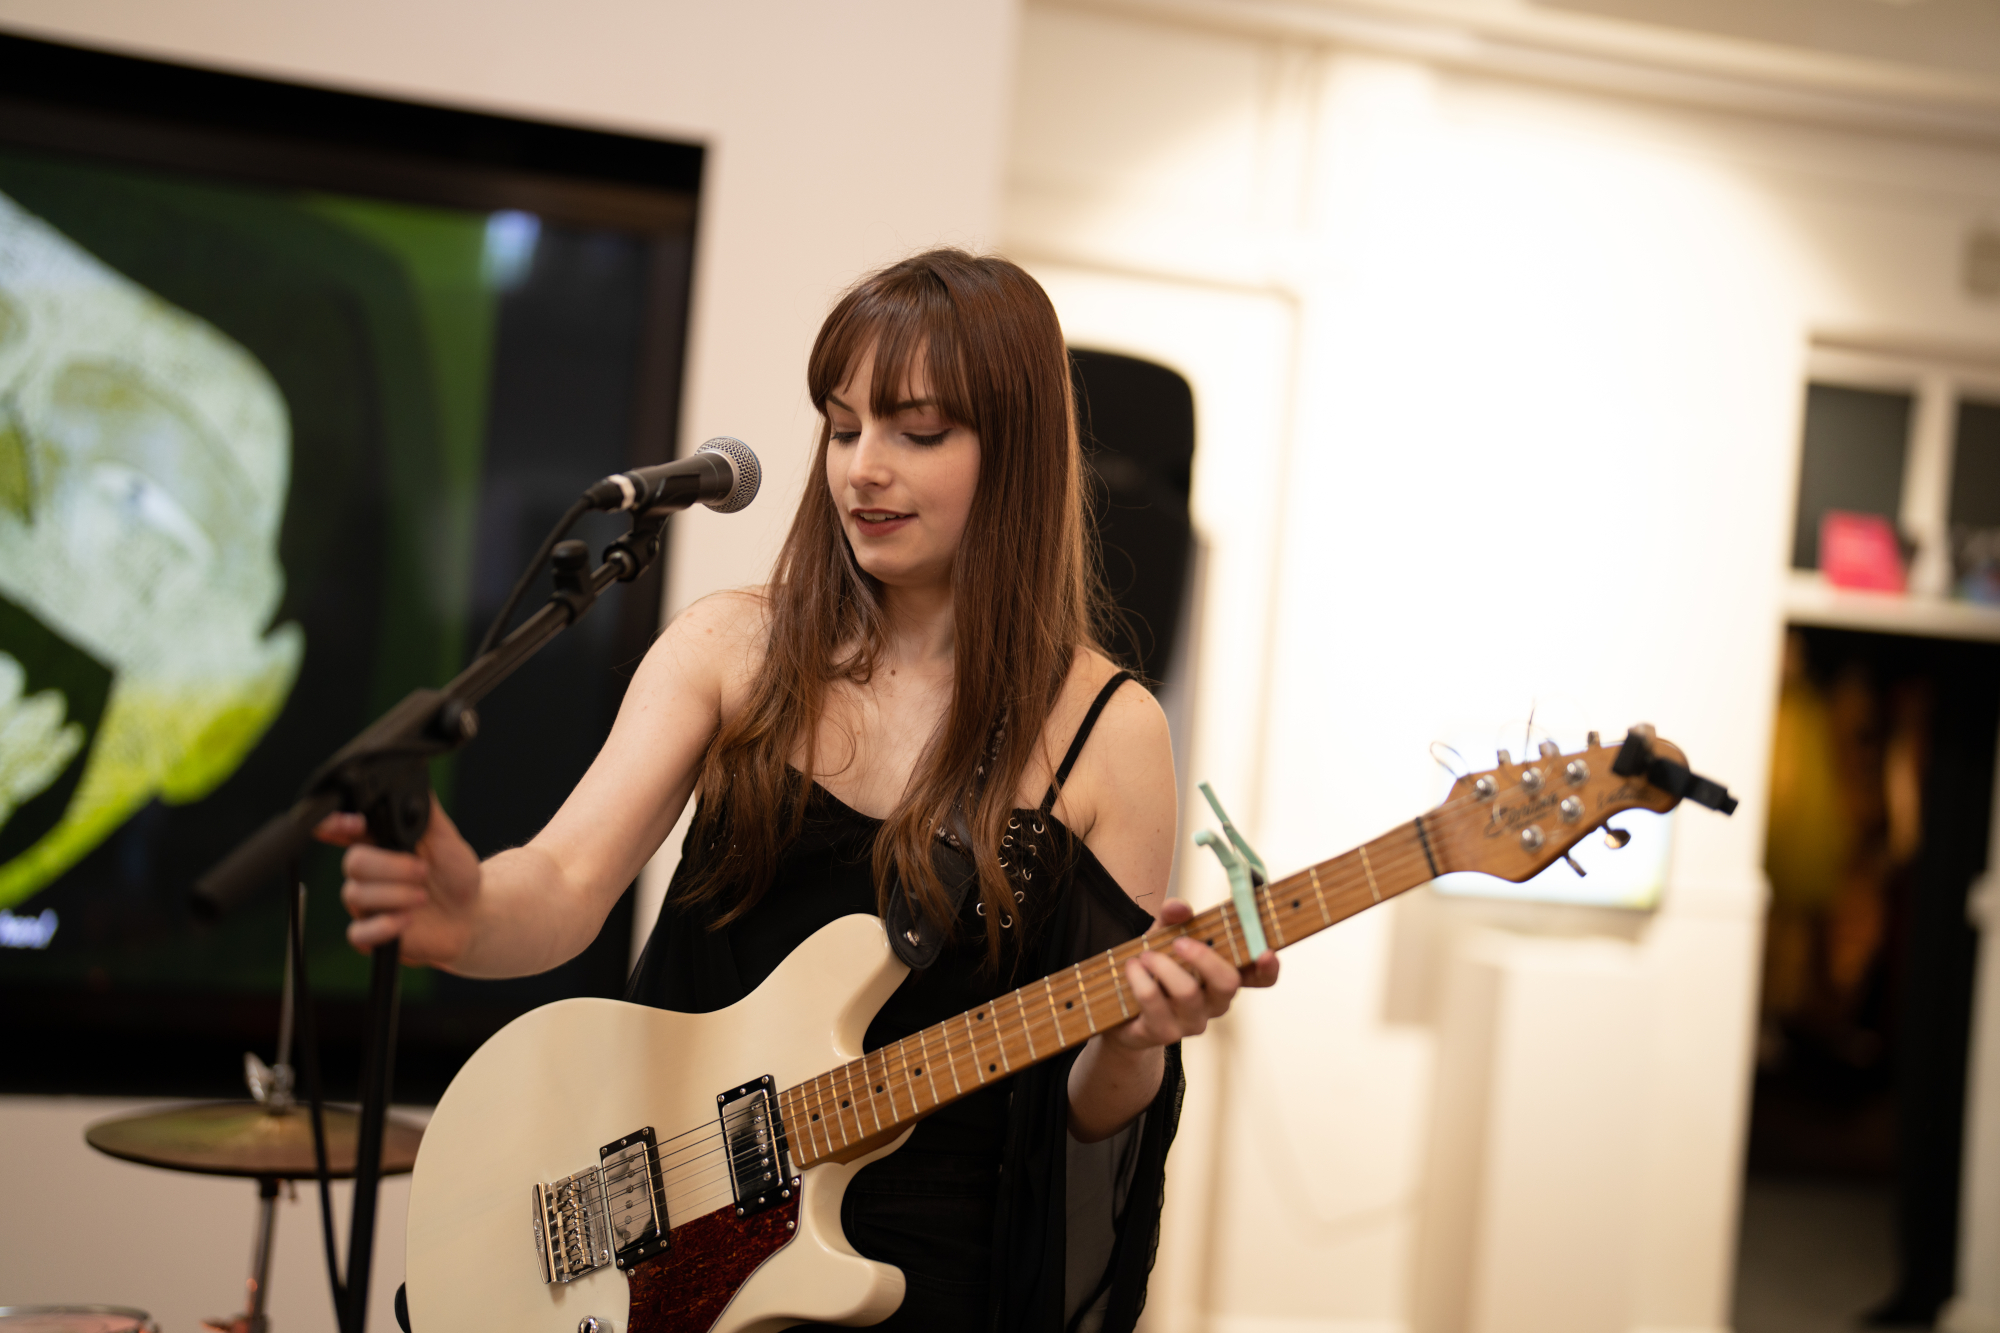 A young woman holding guitar and adjusting mic stand